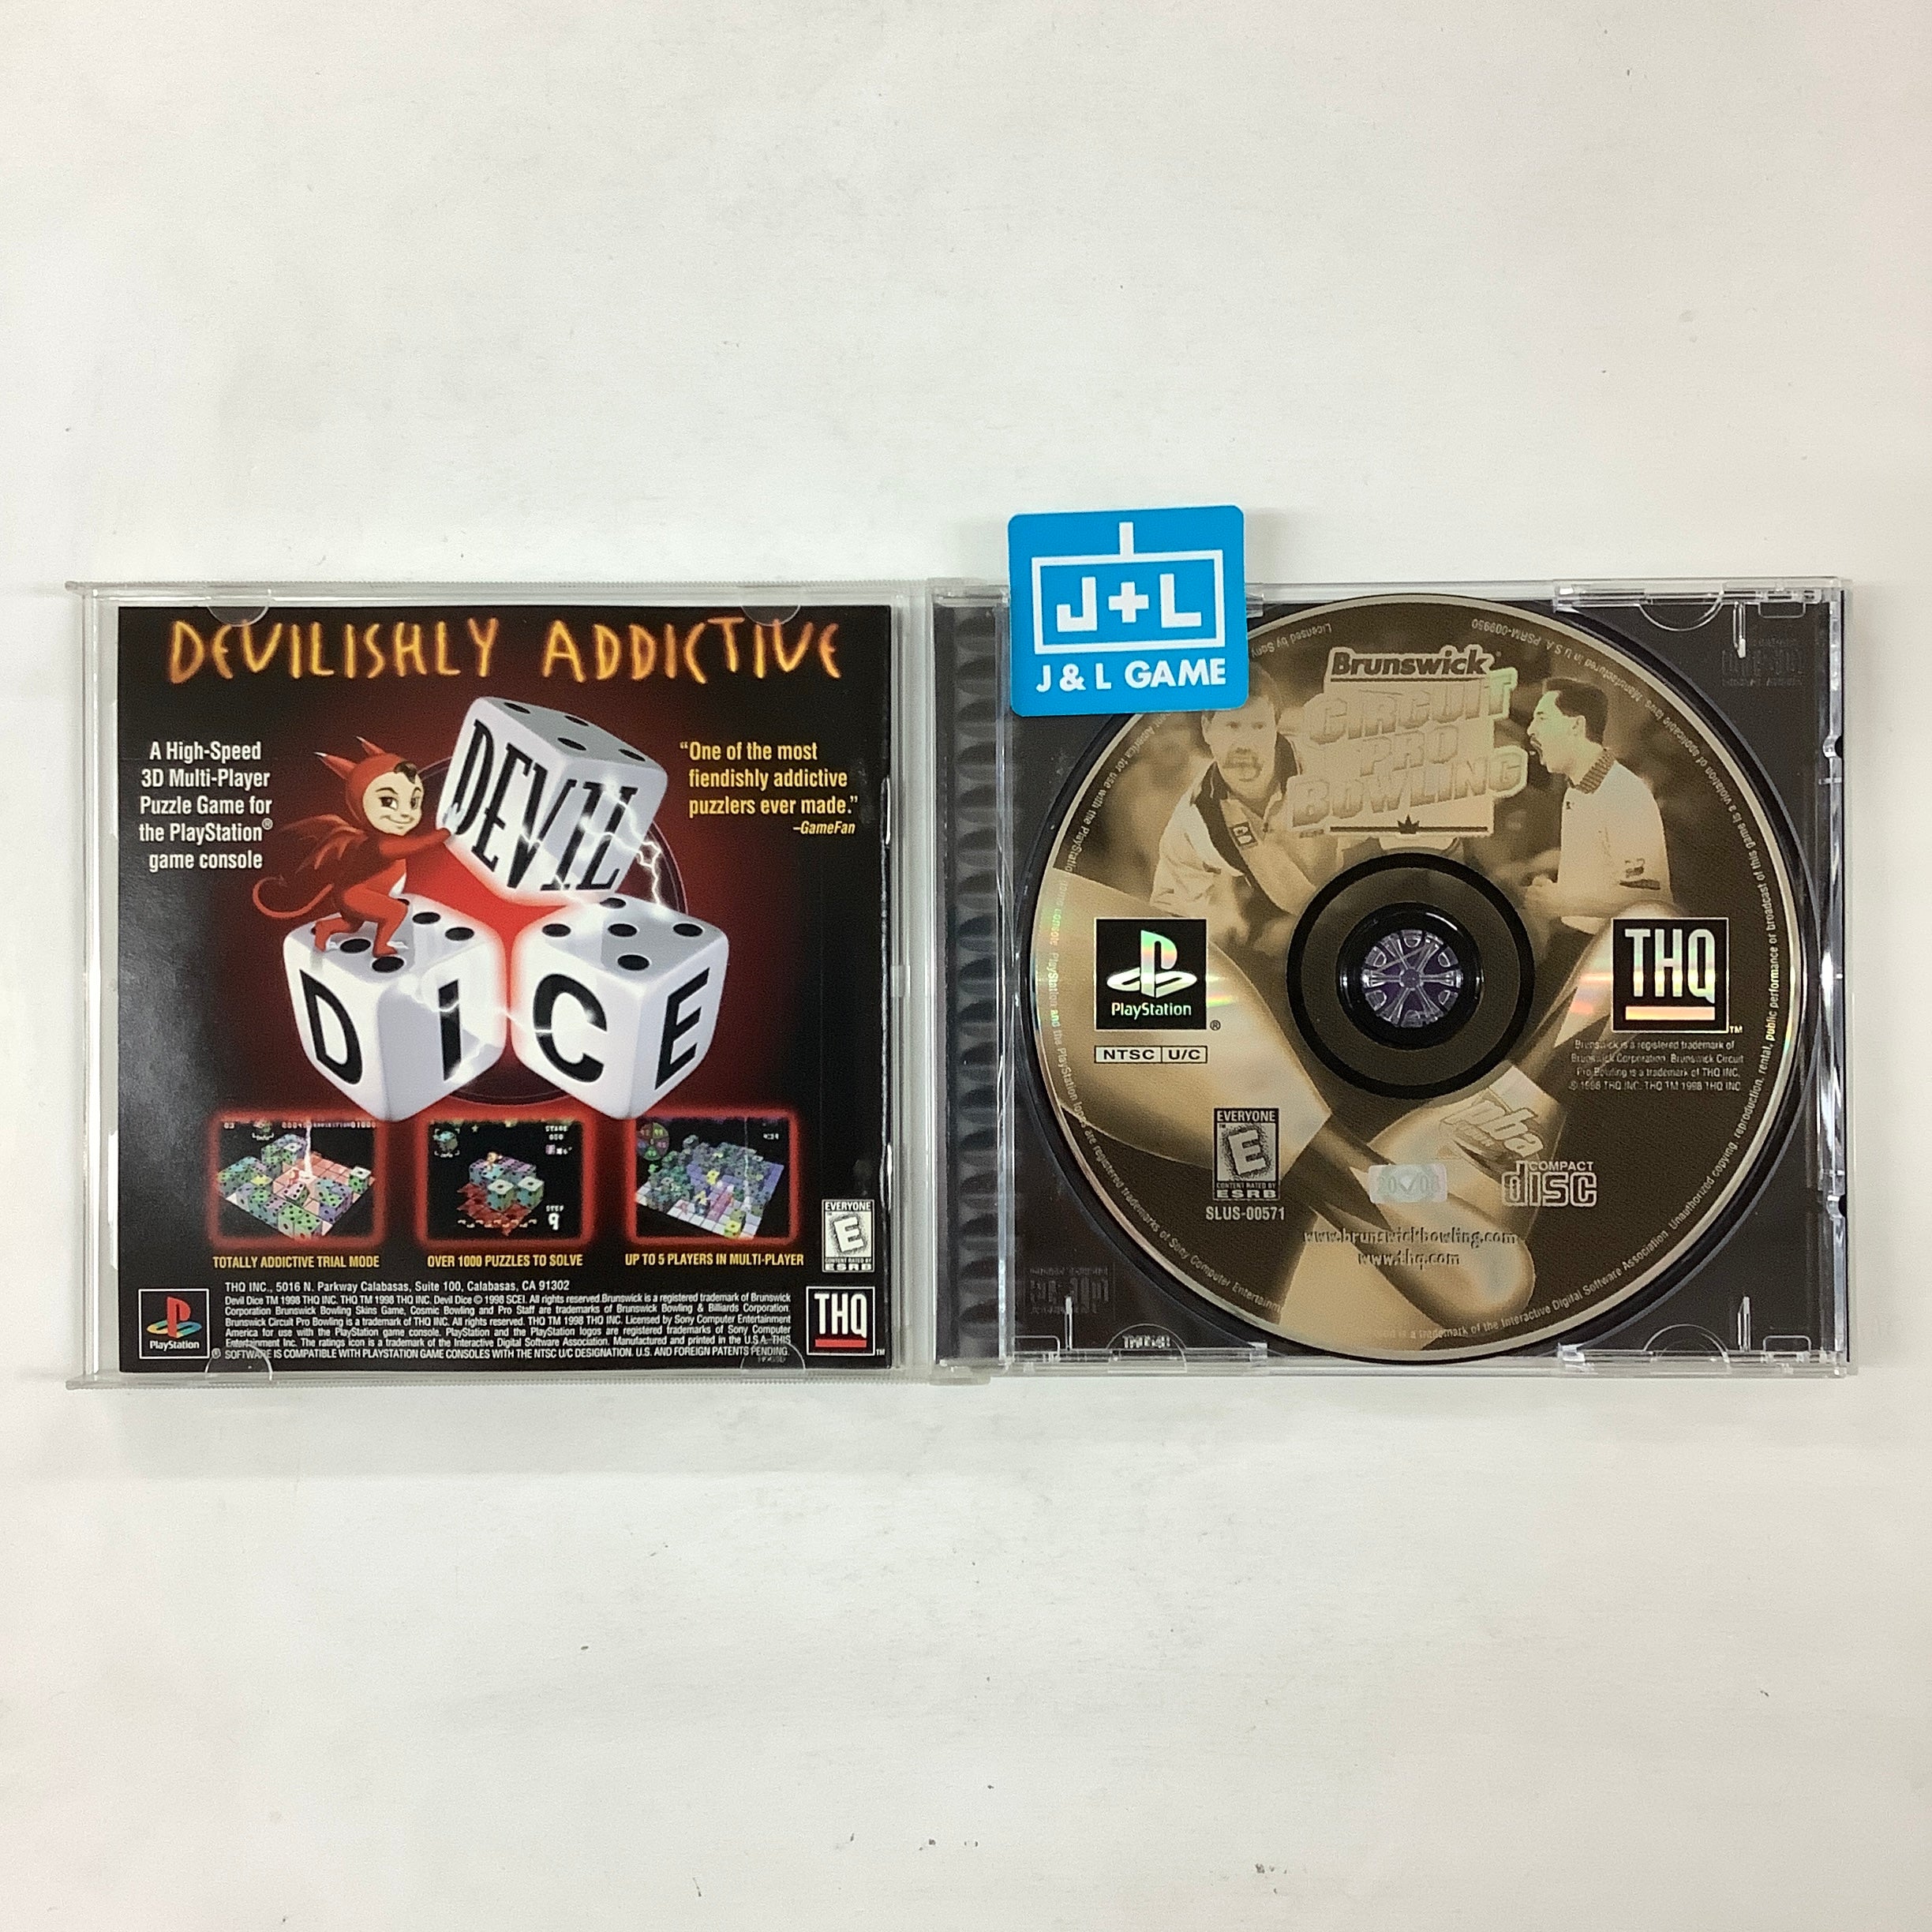 Brunswick Circuit Pro Bowling - (PS1) PlayStation 1 [Pre-Owned] Video Games THQ   